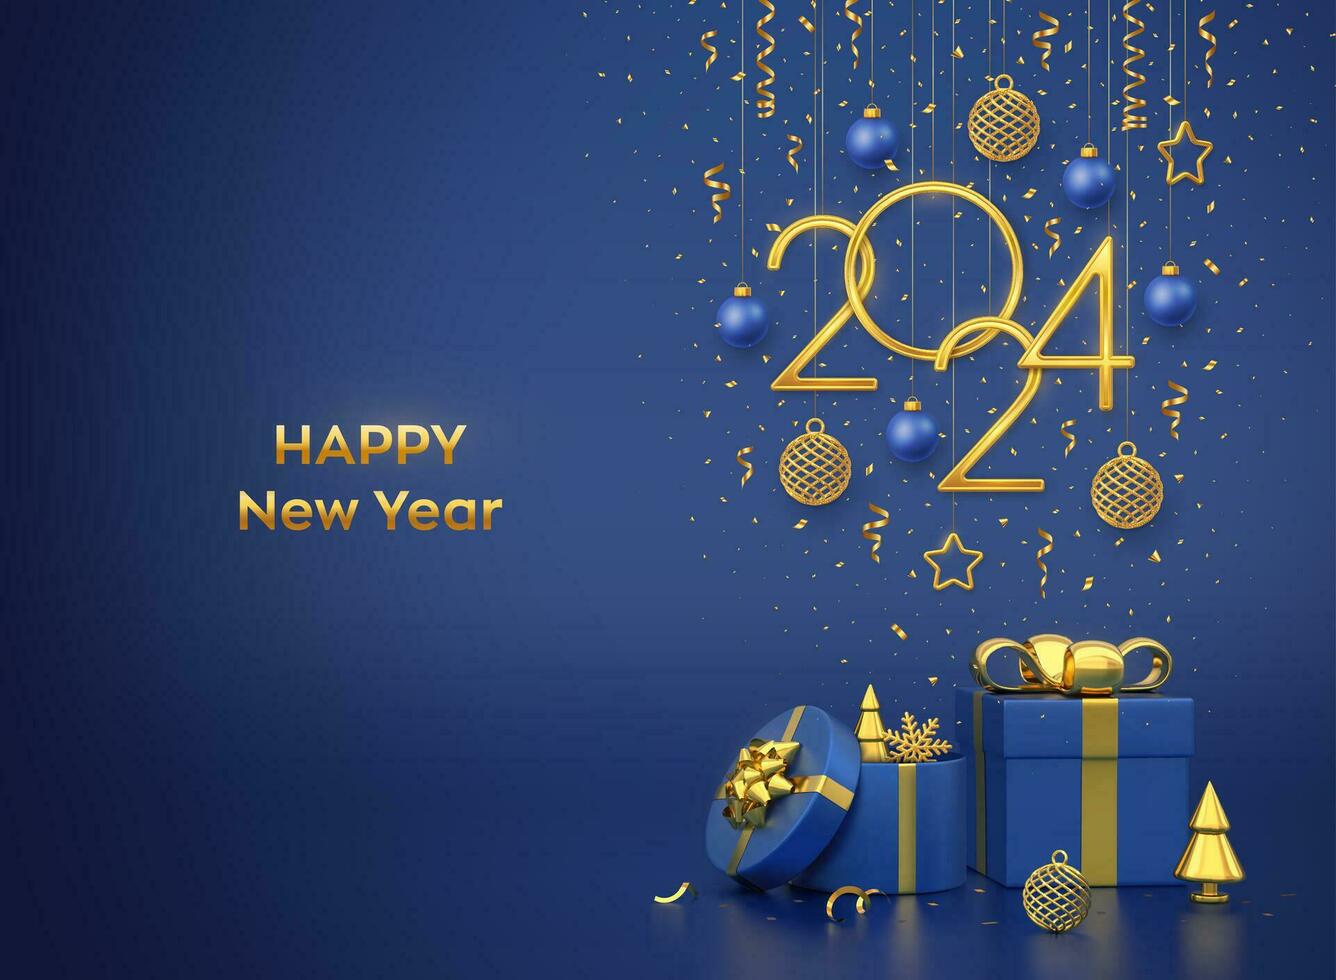 Happy New 2024 Year. Hanging golden metallic numbers 2024 with stars, balls and confetti on blue background. Gift boxes and golden metallic pine or fir, cone shape spruce trees. Vector illustration.